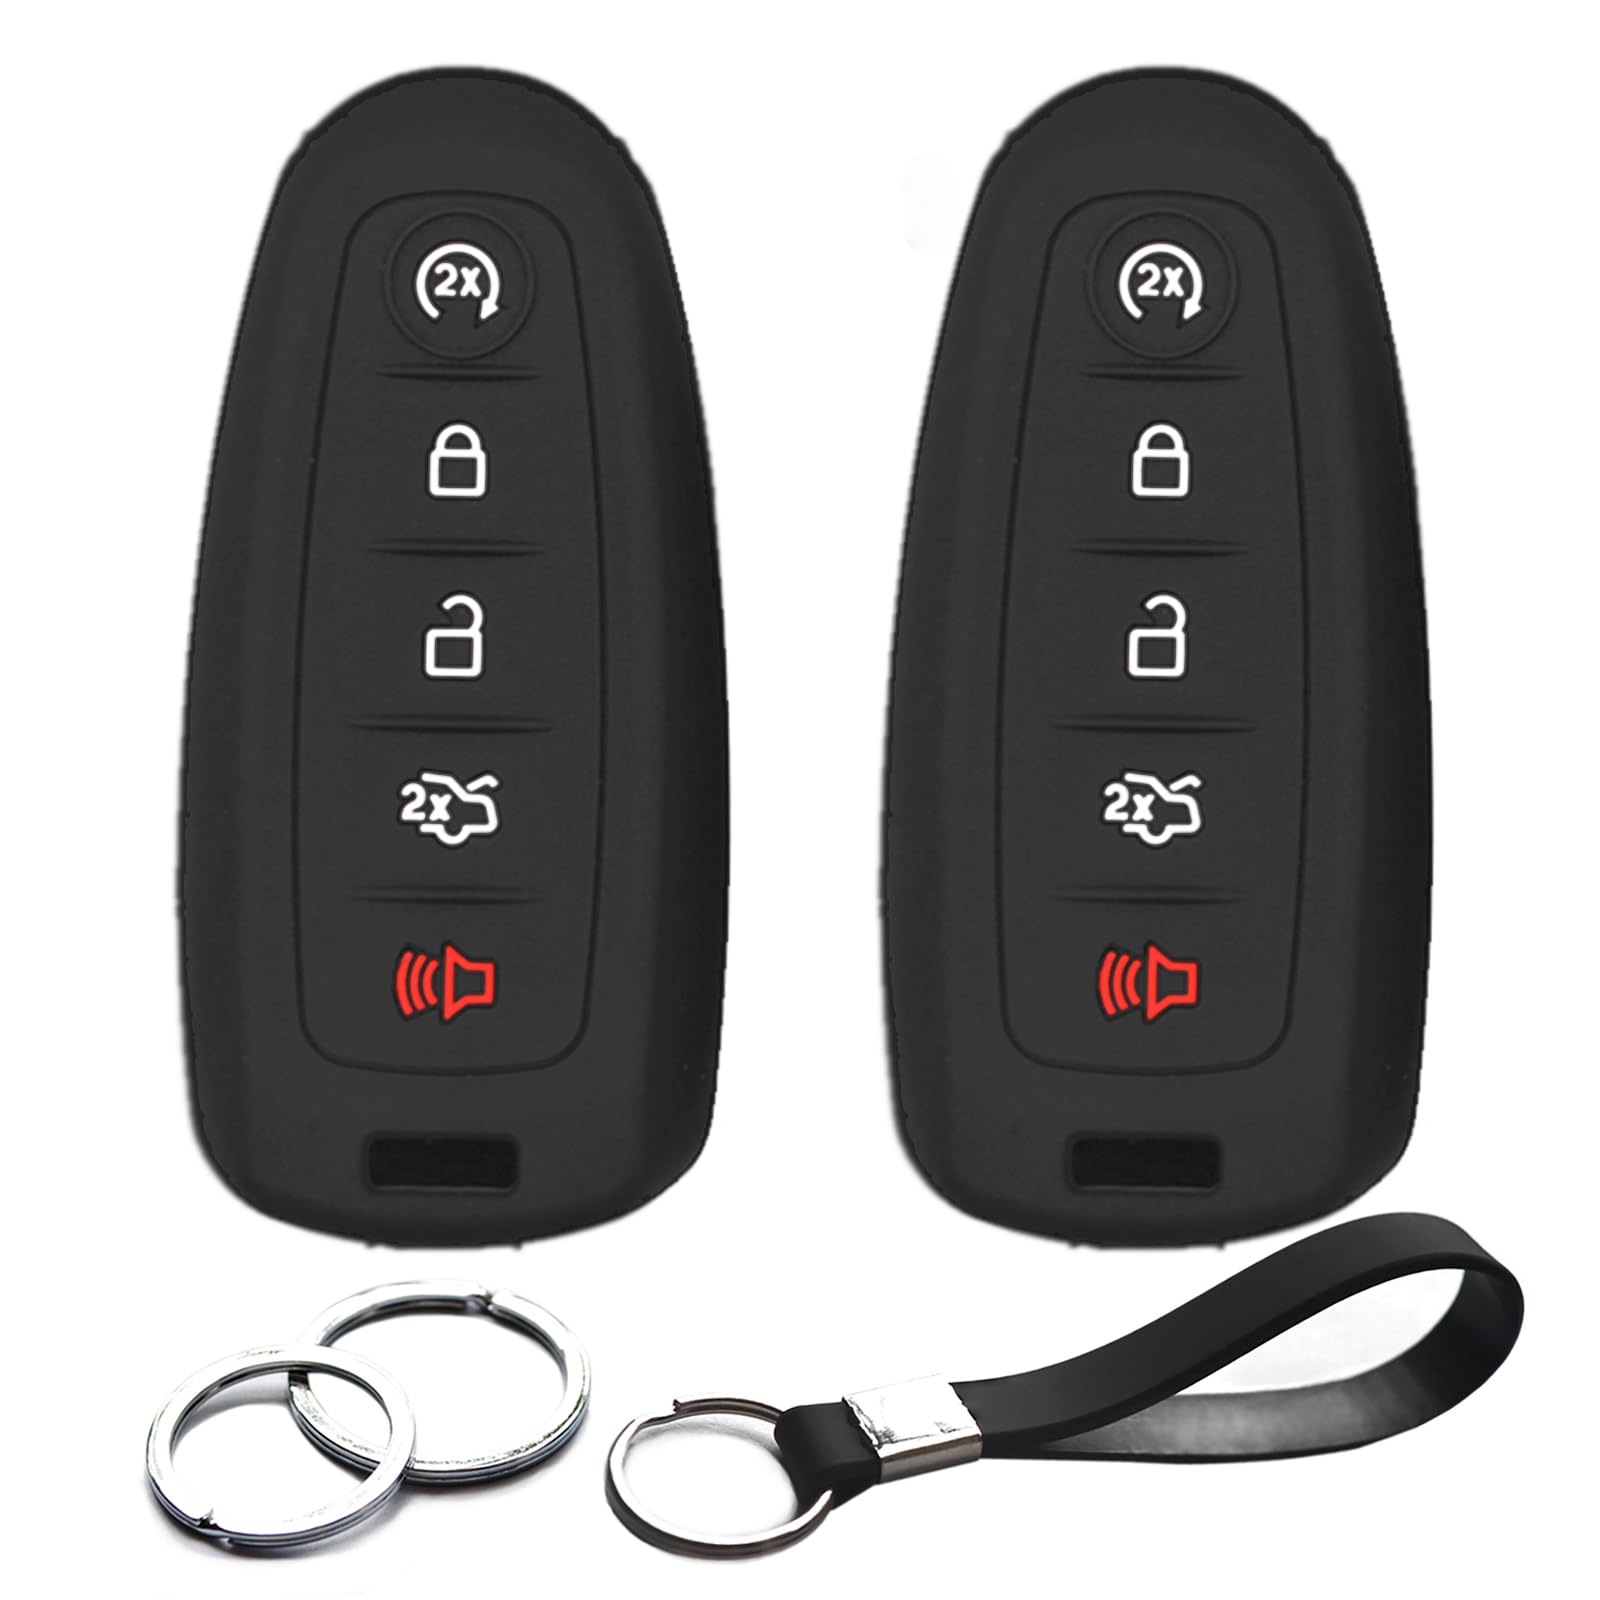 INFIPAR 2pcs Compatible with Ford Escape Edge Expedition Explorer Fiesta Flex Focus Taurus C-Max Lincoln Navigator MKS MKT MKX MKZ Black Key Fob Cover Case Key Chain Protector